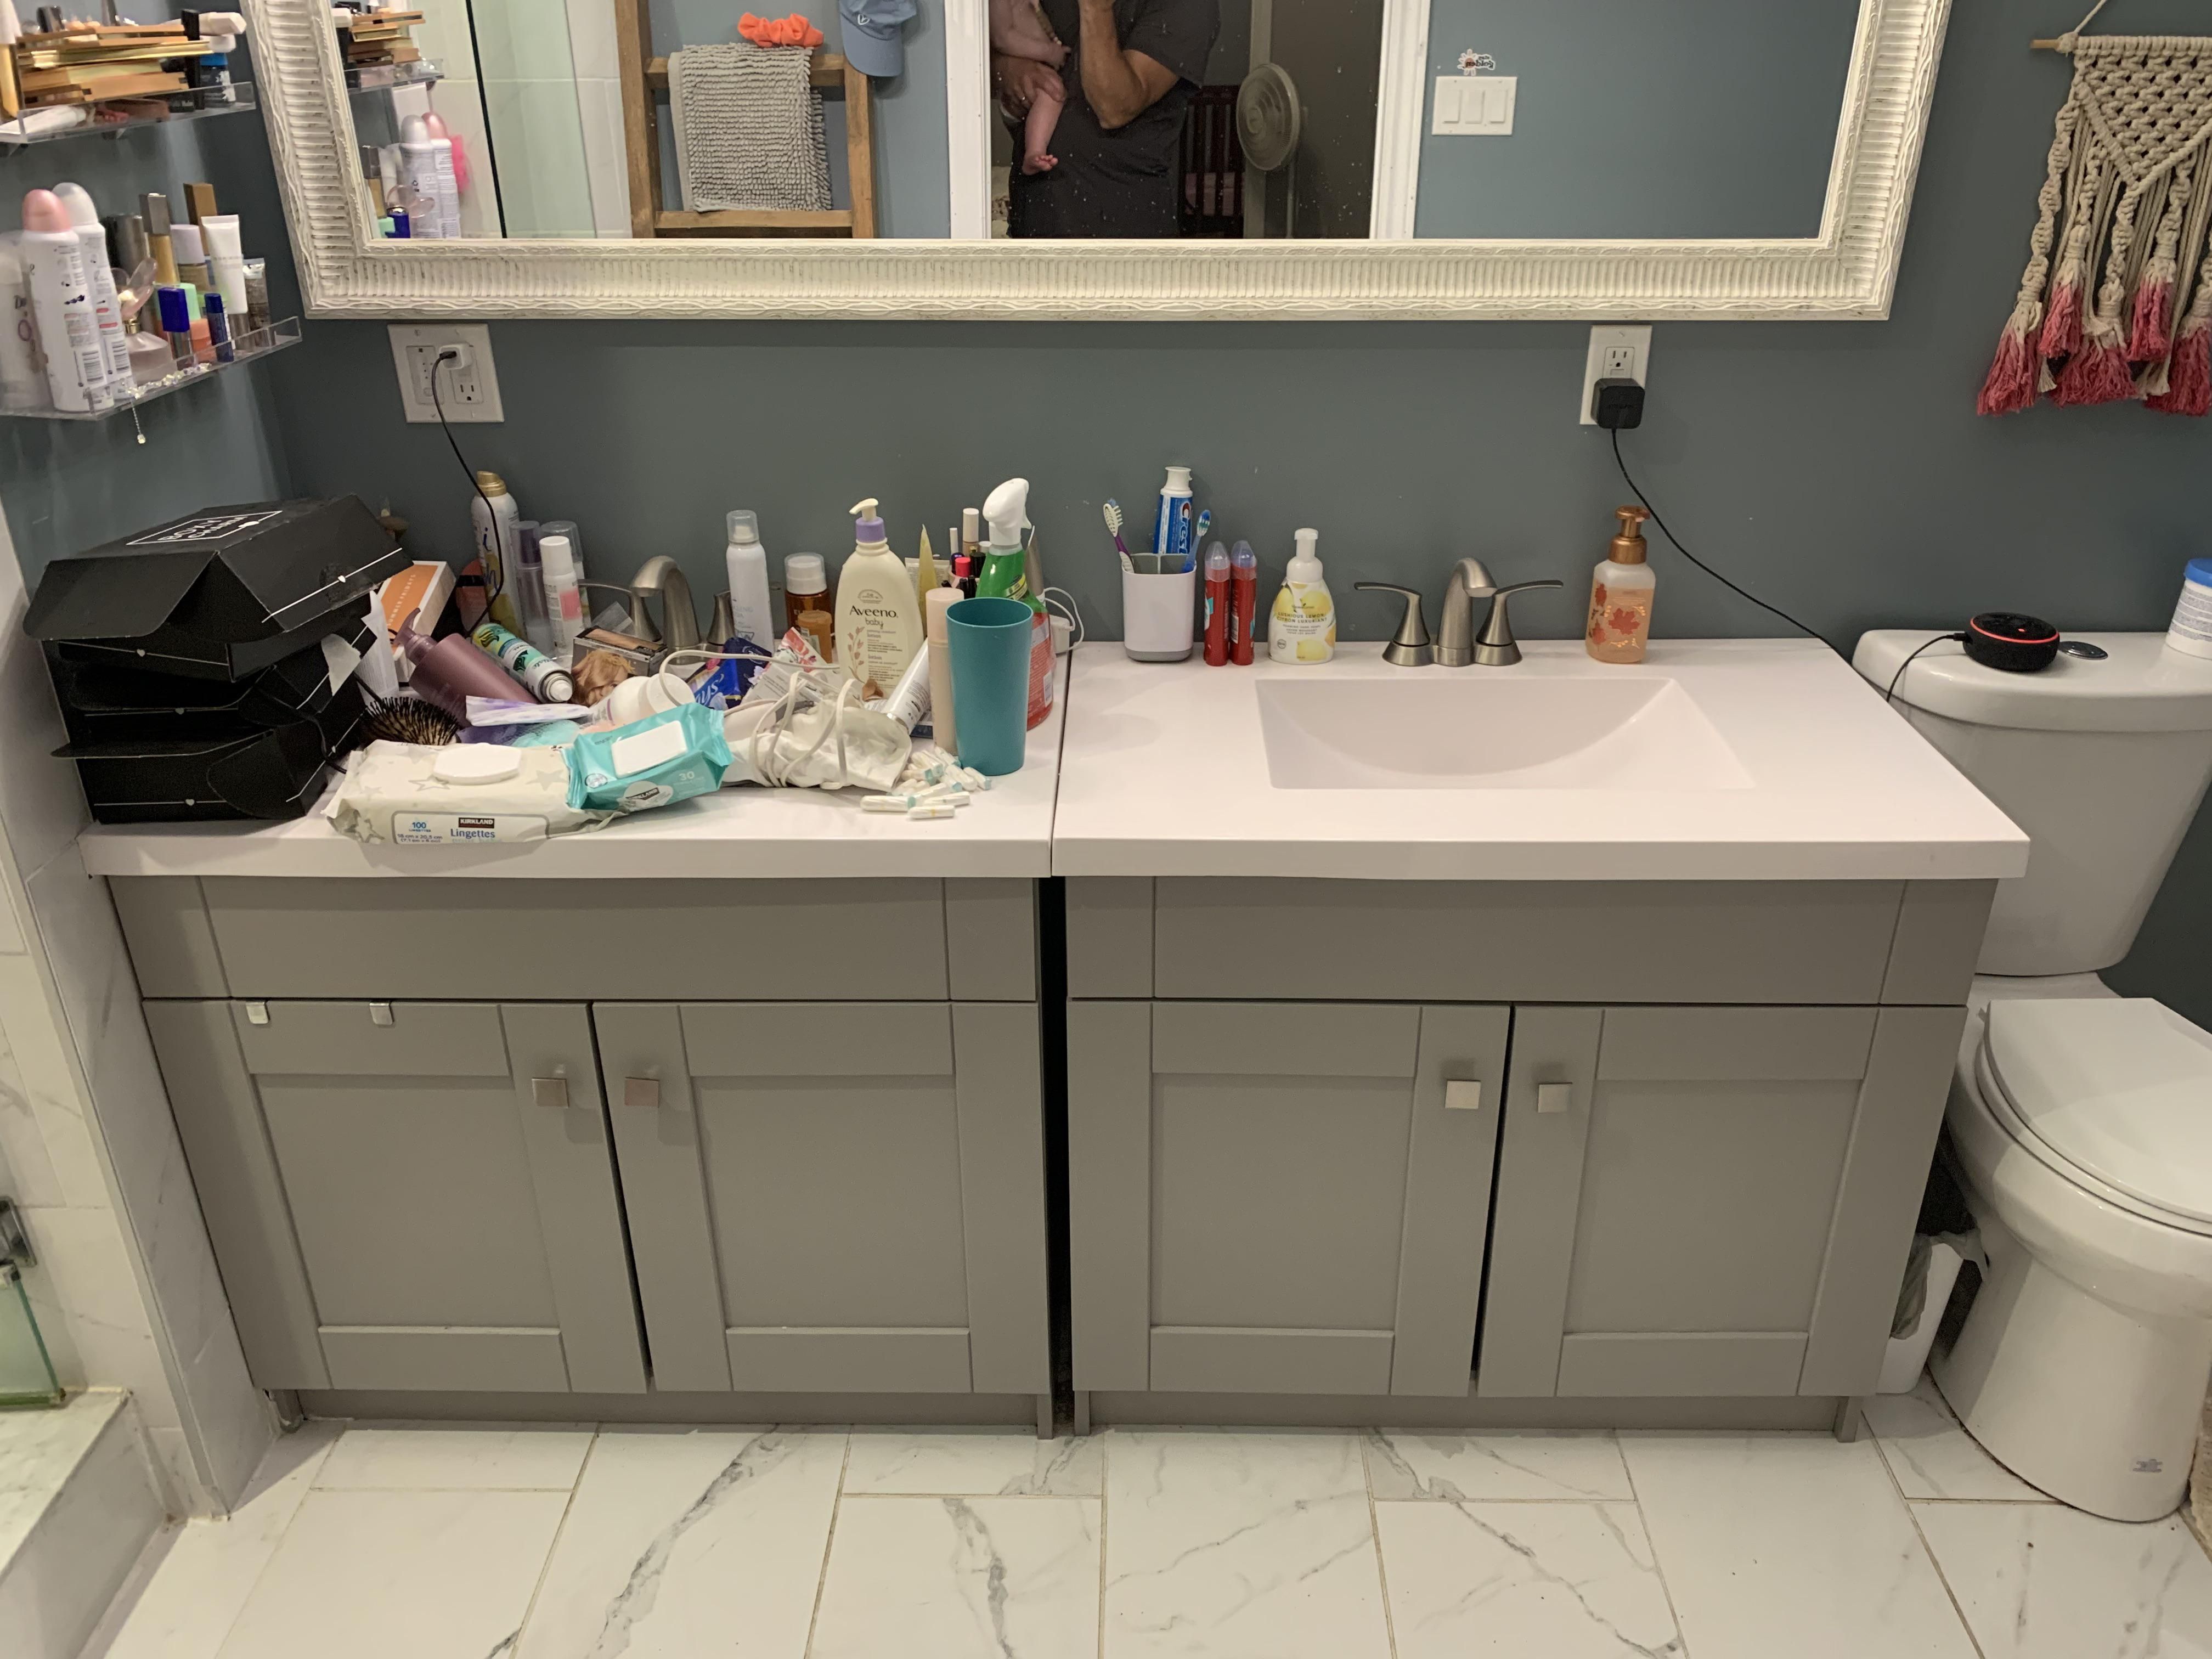 This is what they really mean by His and Hers vanity